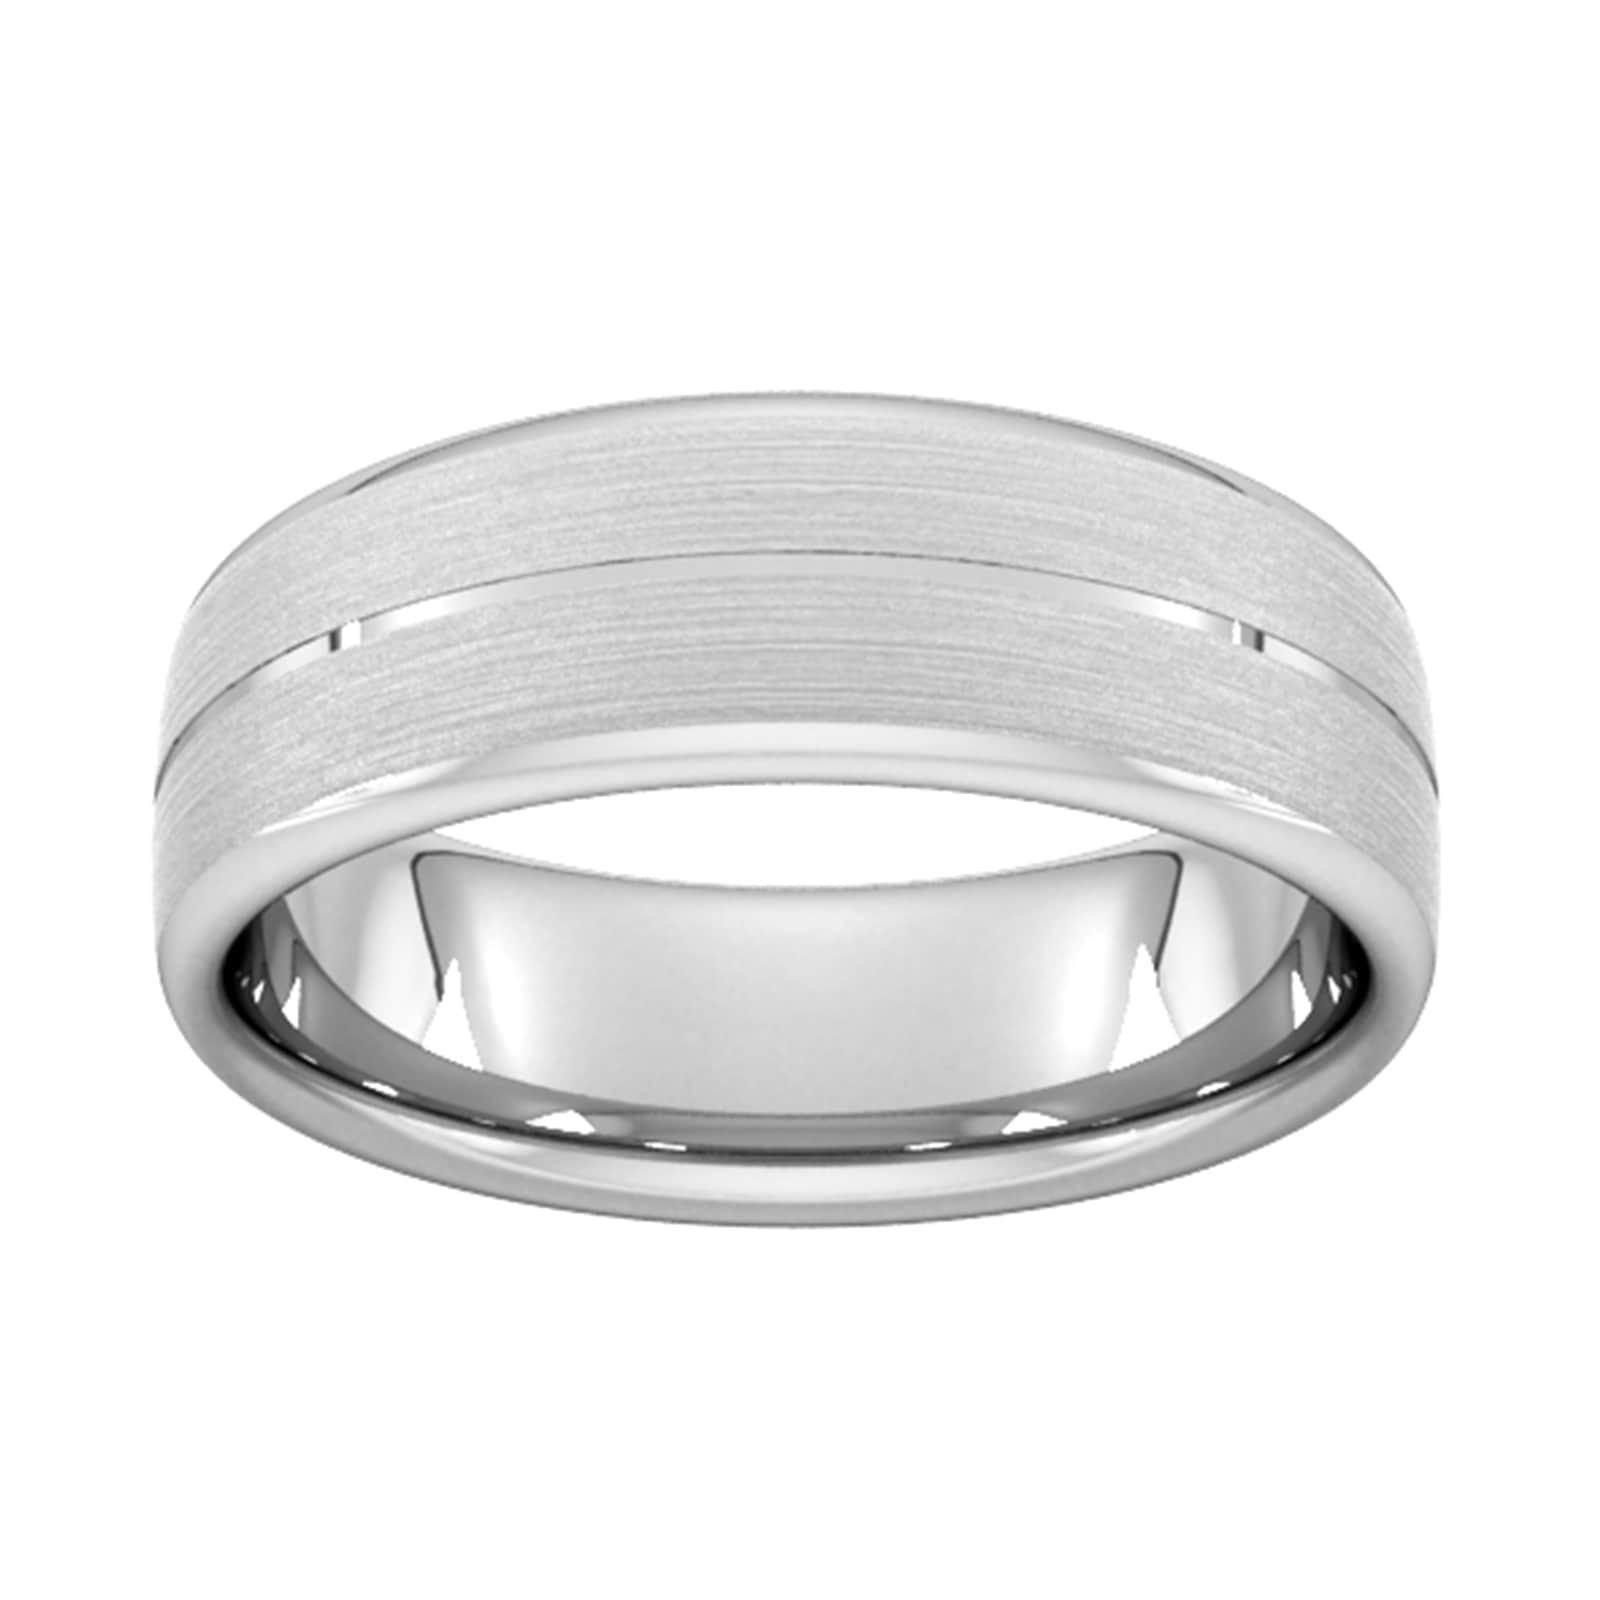 7mm Slight Court Heavy Centre Groove With Chamfered Edge Wedding Ring In 9 Carat White Gold - Ring Size J